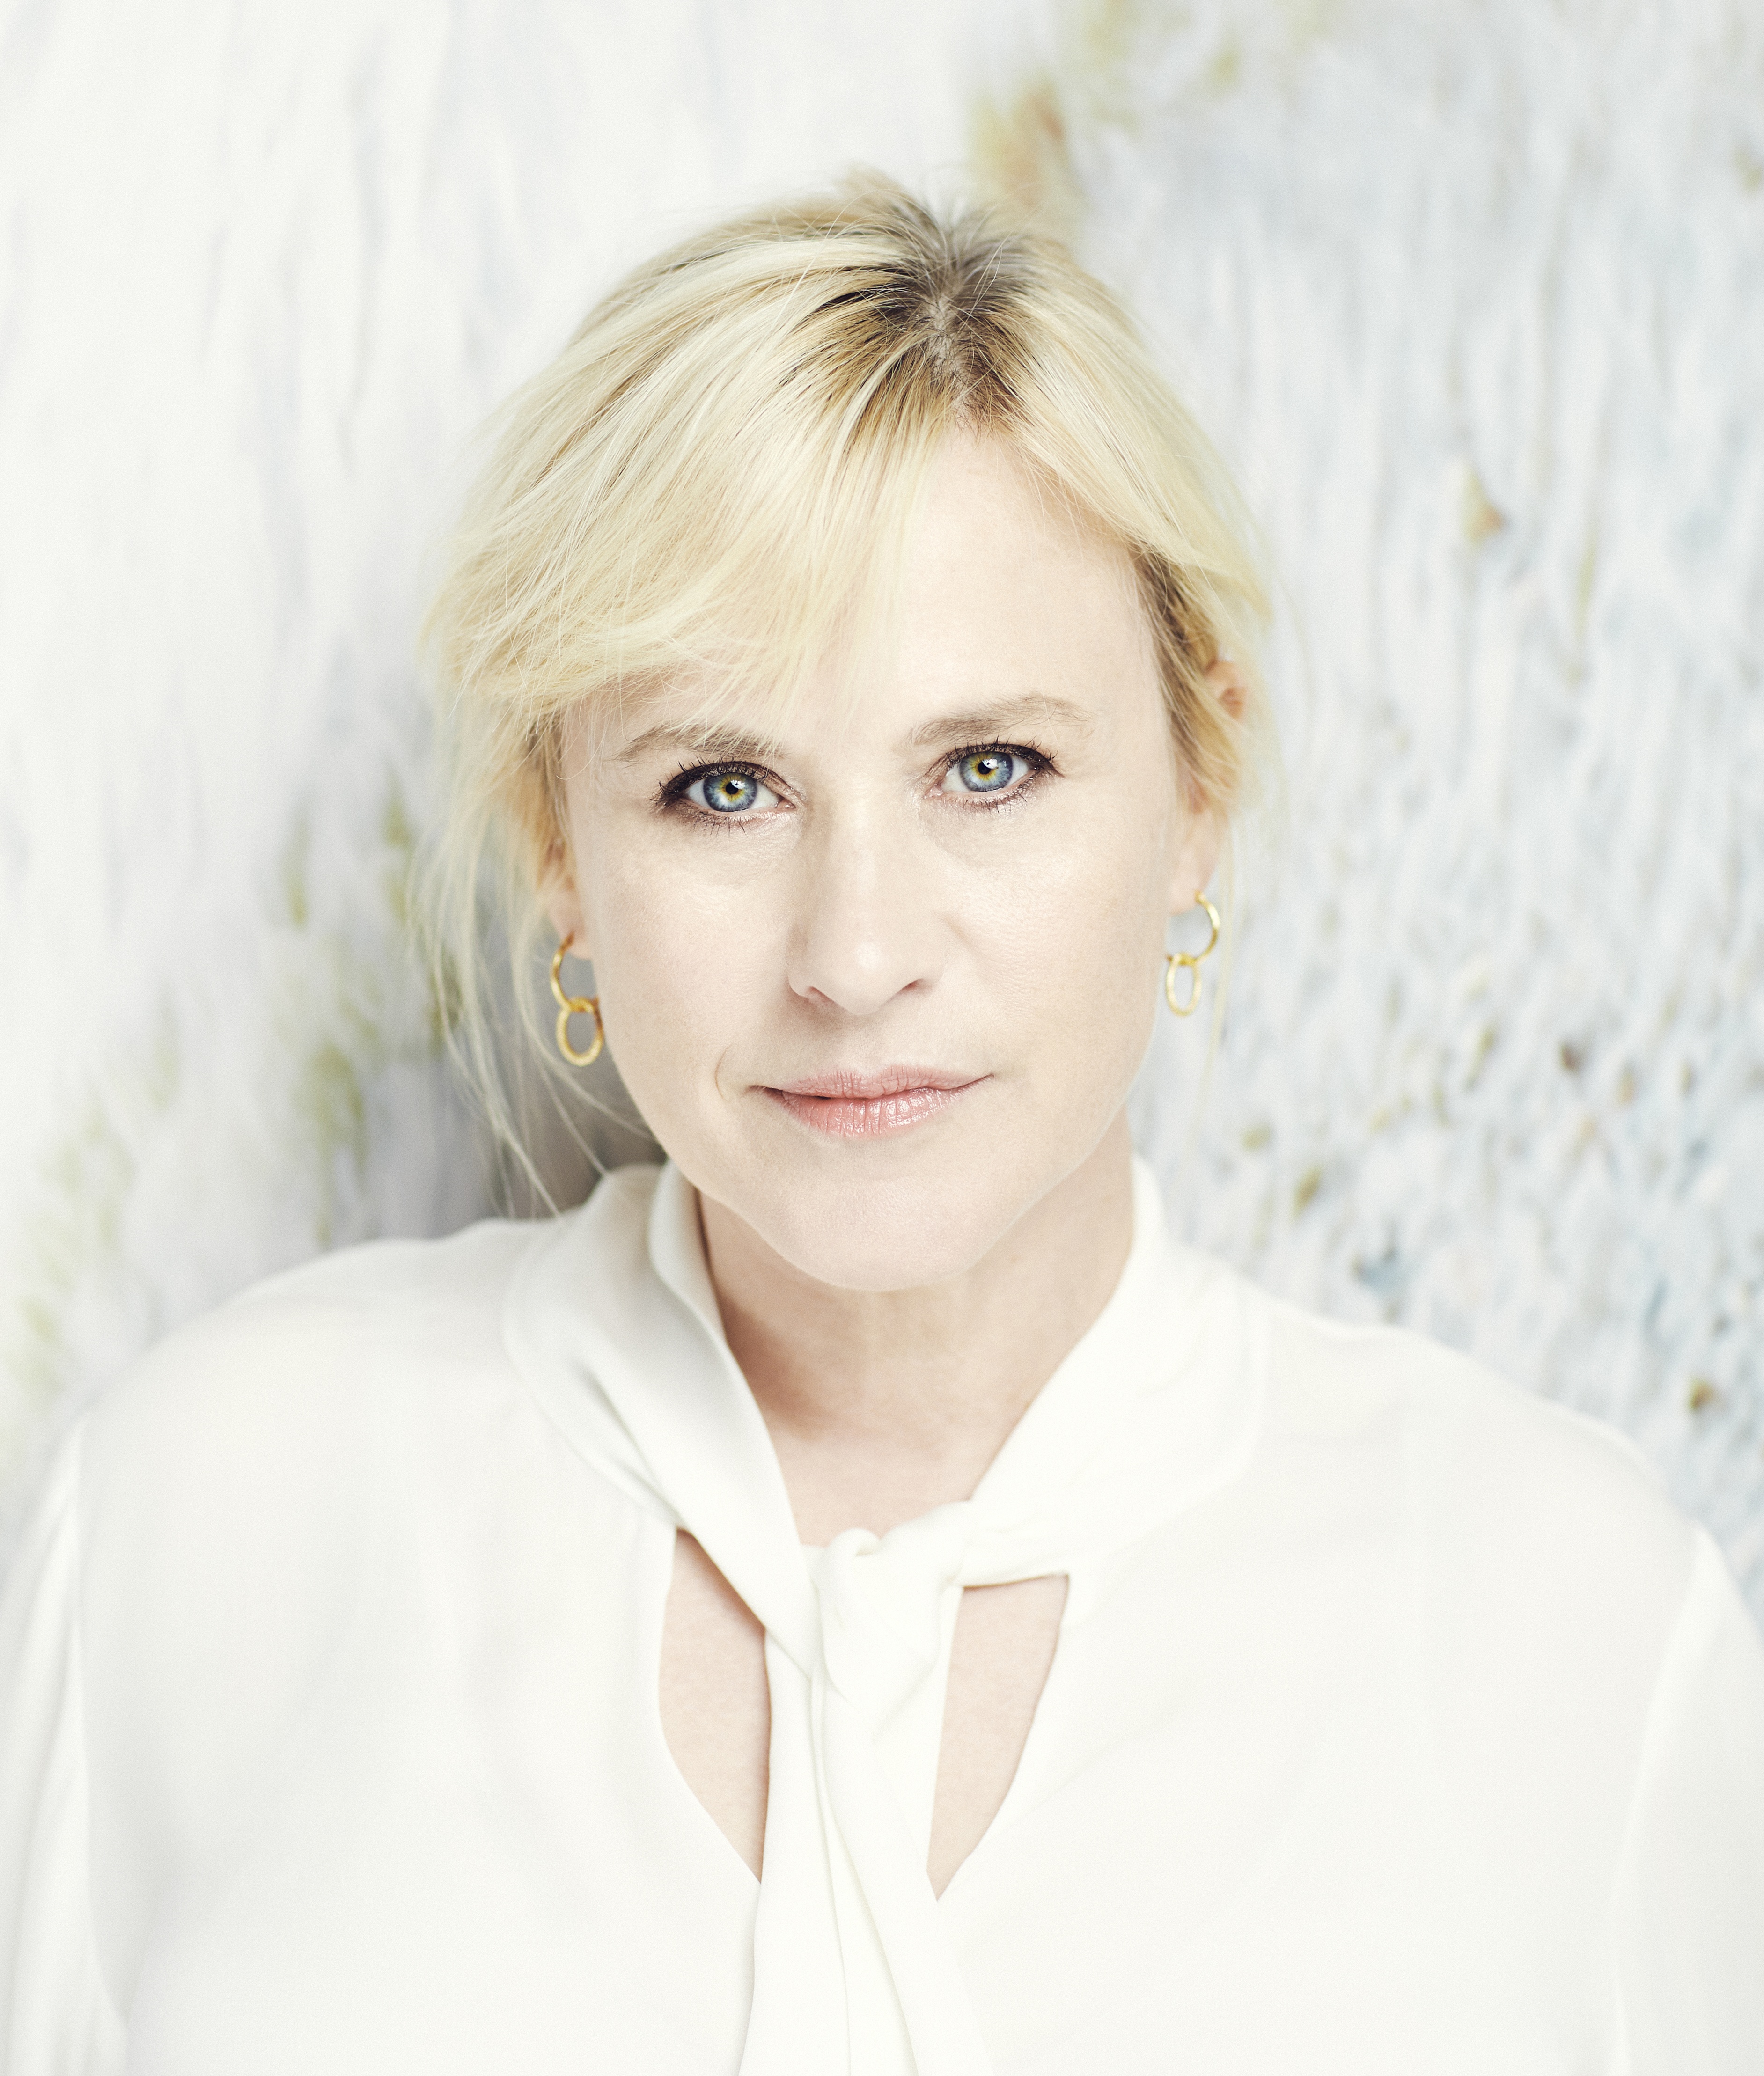 How To Become An Actor Like Patricia Arquette